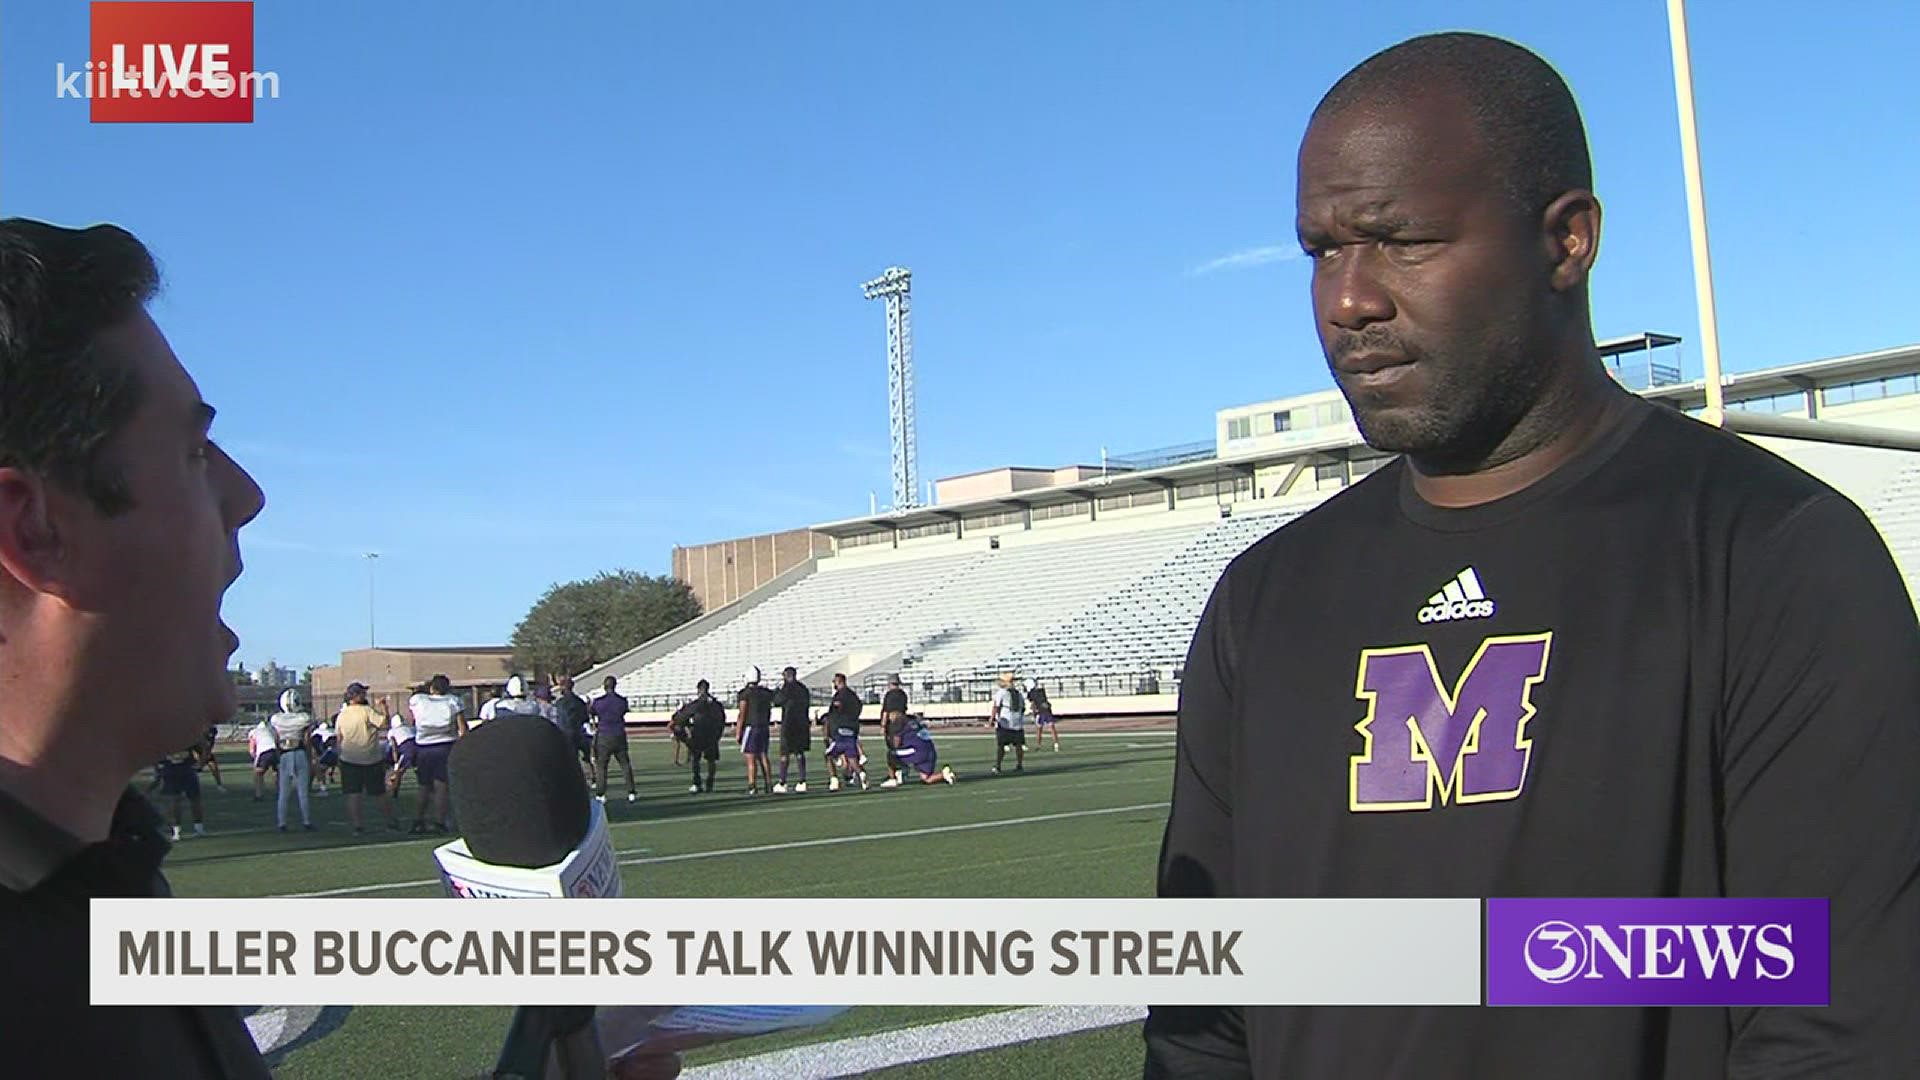 Evans talks about bringing a high quality program like La Vega to town with Saturday's match-up.